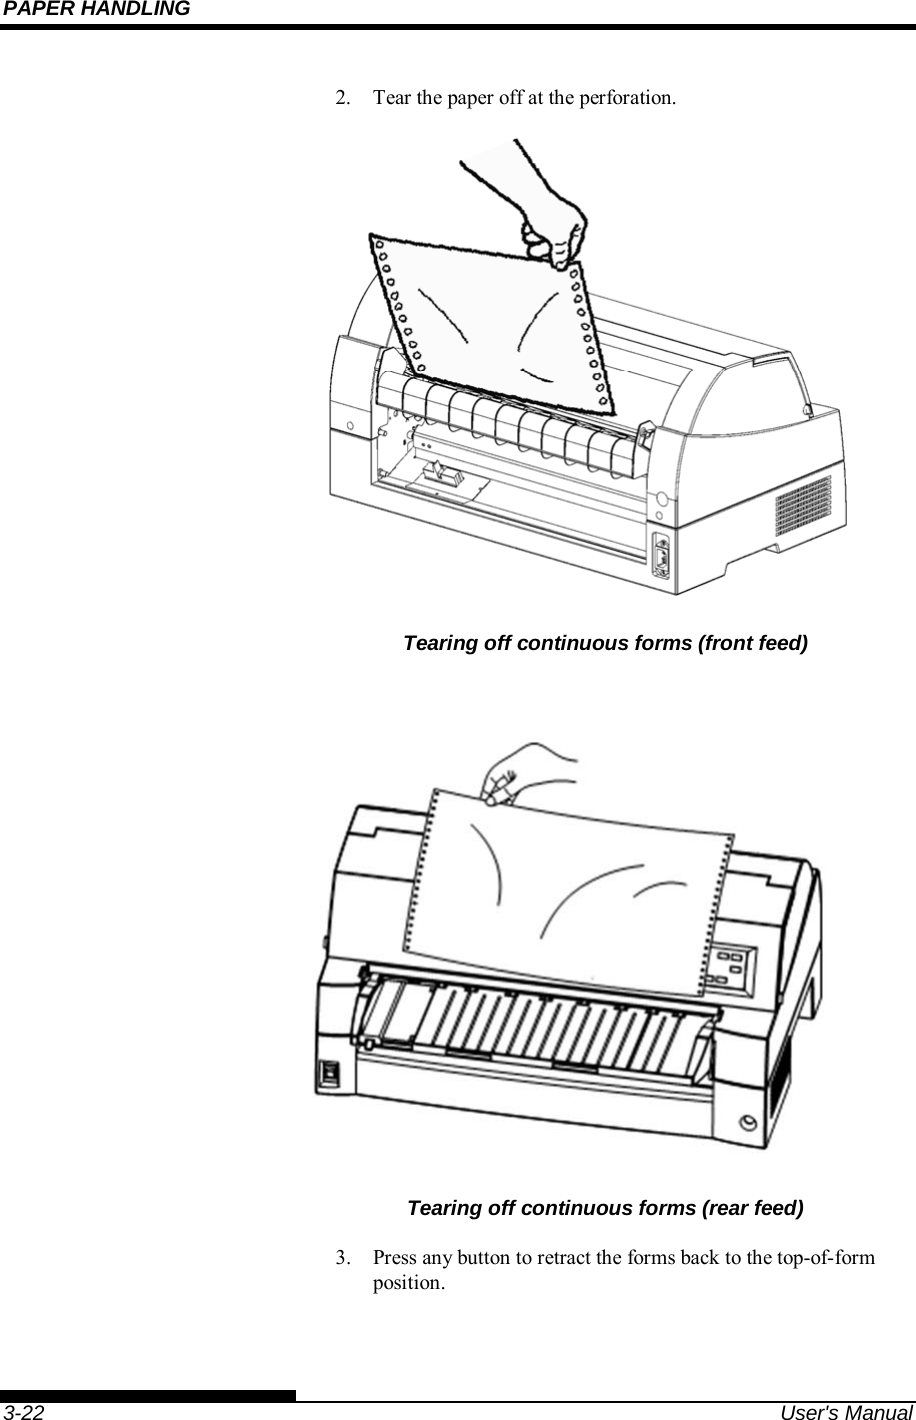 PAPER HANDLING    3-22  User&apos;s Manual 2.  Tear the paper off at the perforation.  Tearing off continuous forms (front feed)  Tearing off continuous forms (rear feed) 3.  Press any button to retract the forms back to the top-of-form position.  